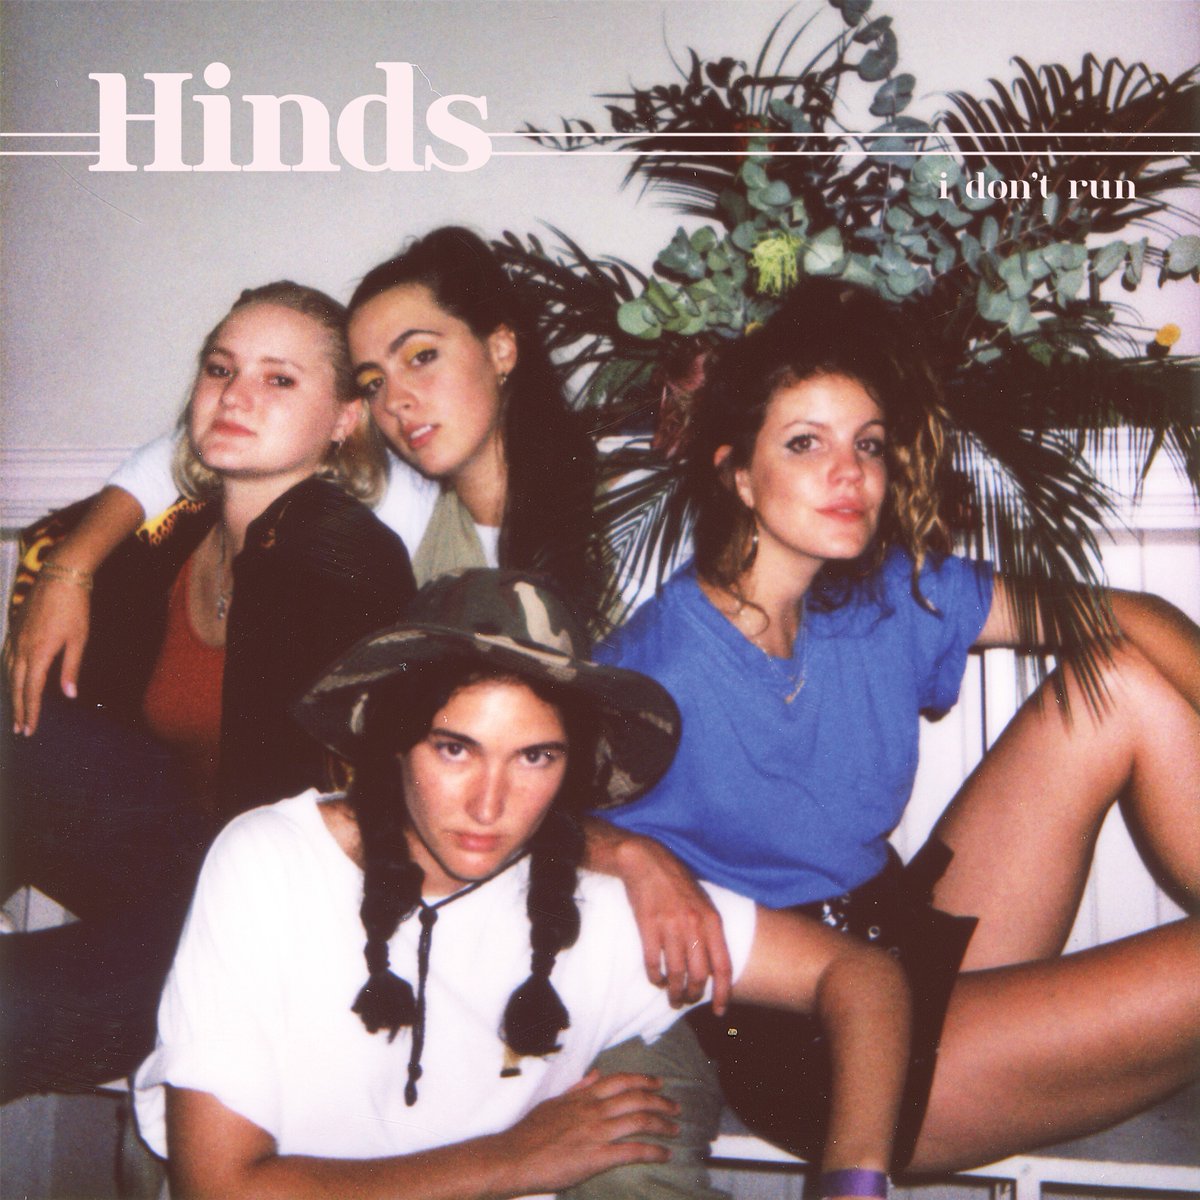 Hinds delivers “charismatic” performance - PantherNOW